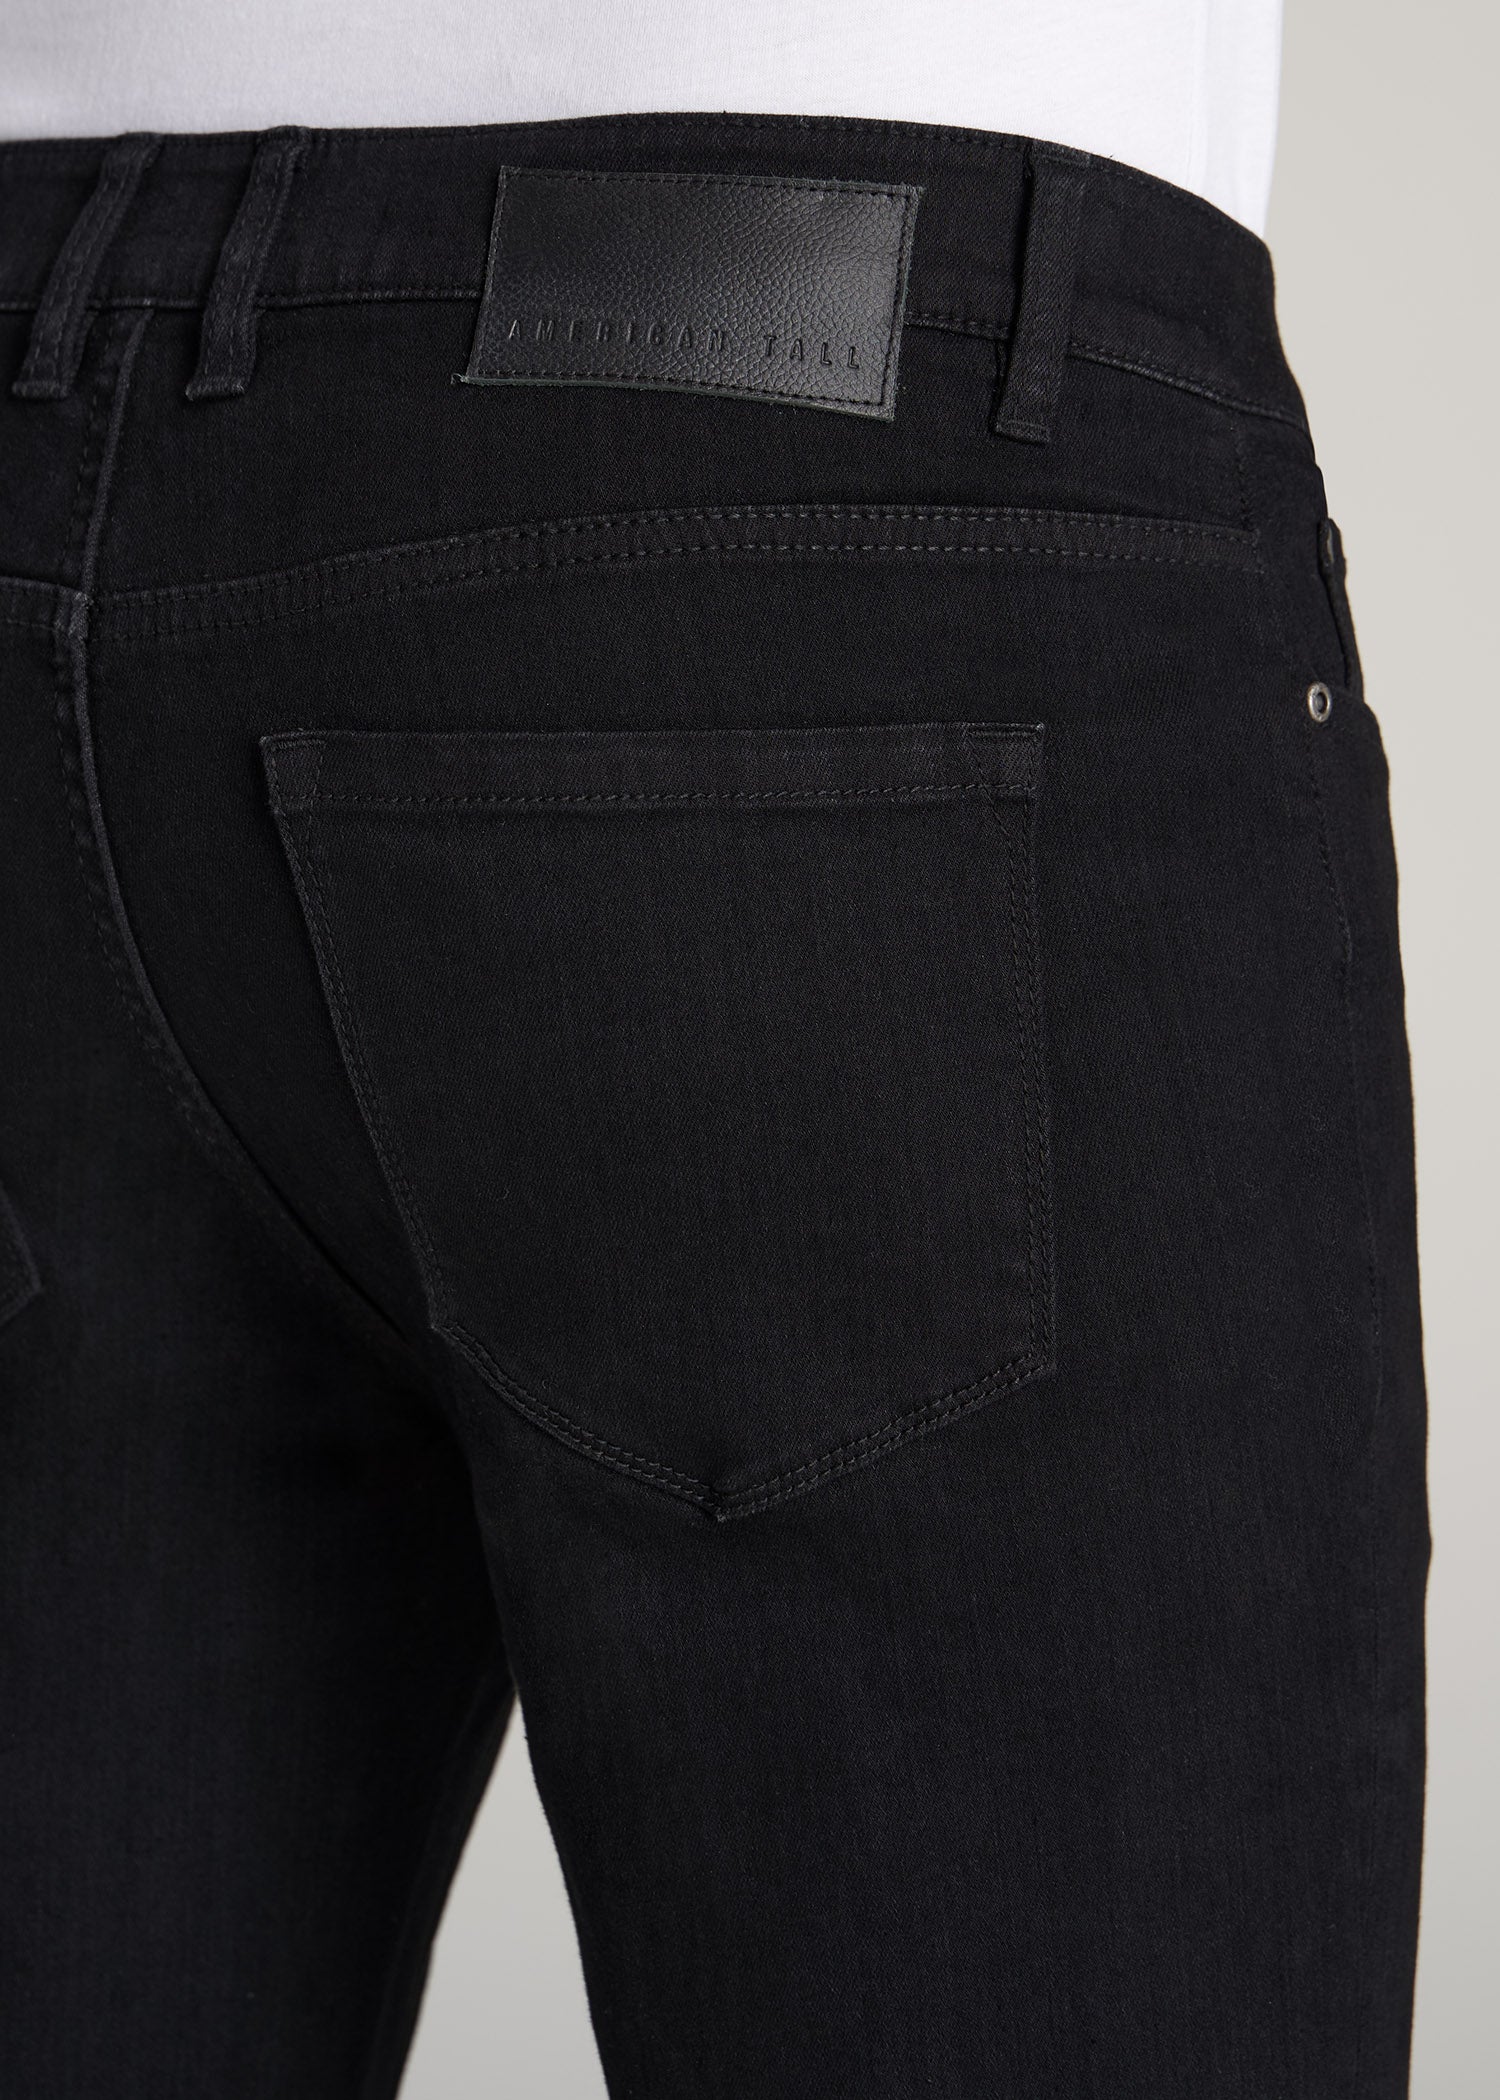 Dylan Slim Fit Jeans: Black Slim-fit Jeans for Tall Men – American Tall